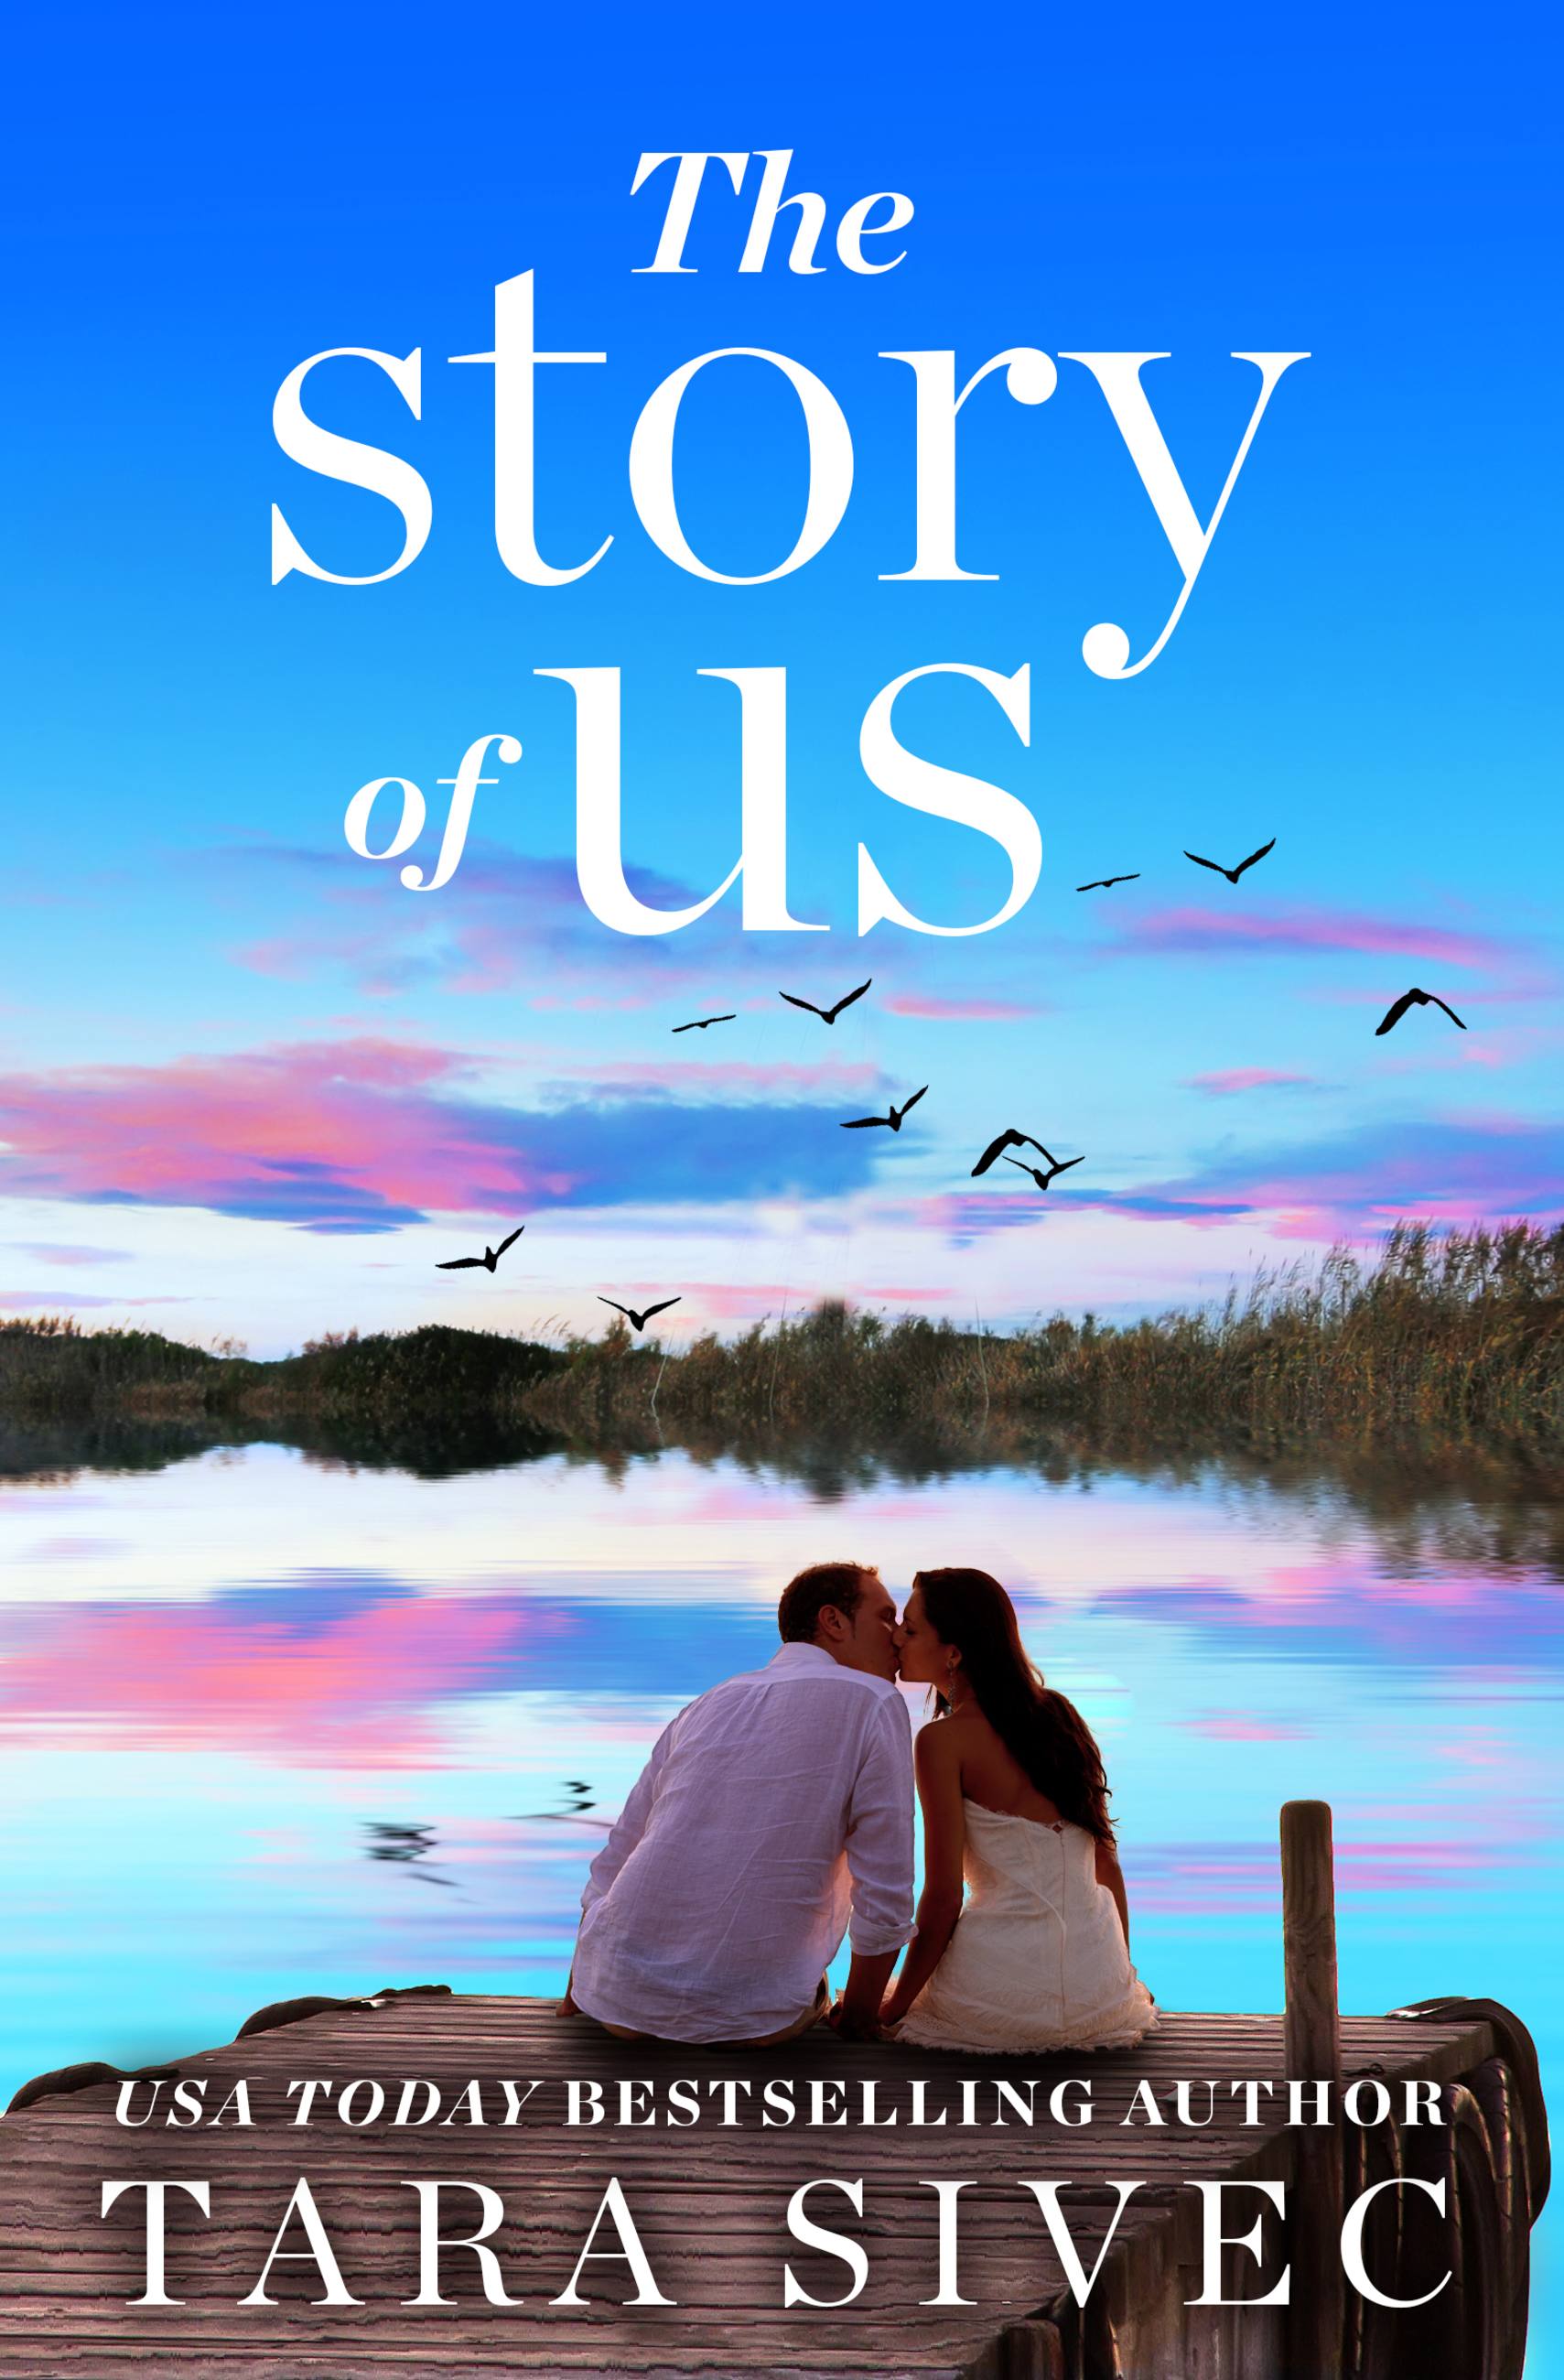 The Story of Us - <5